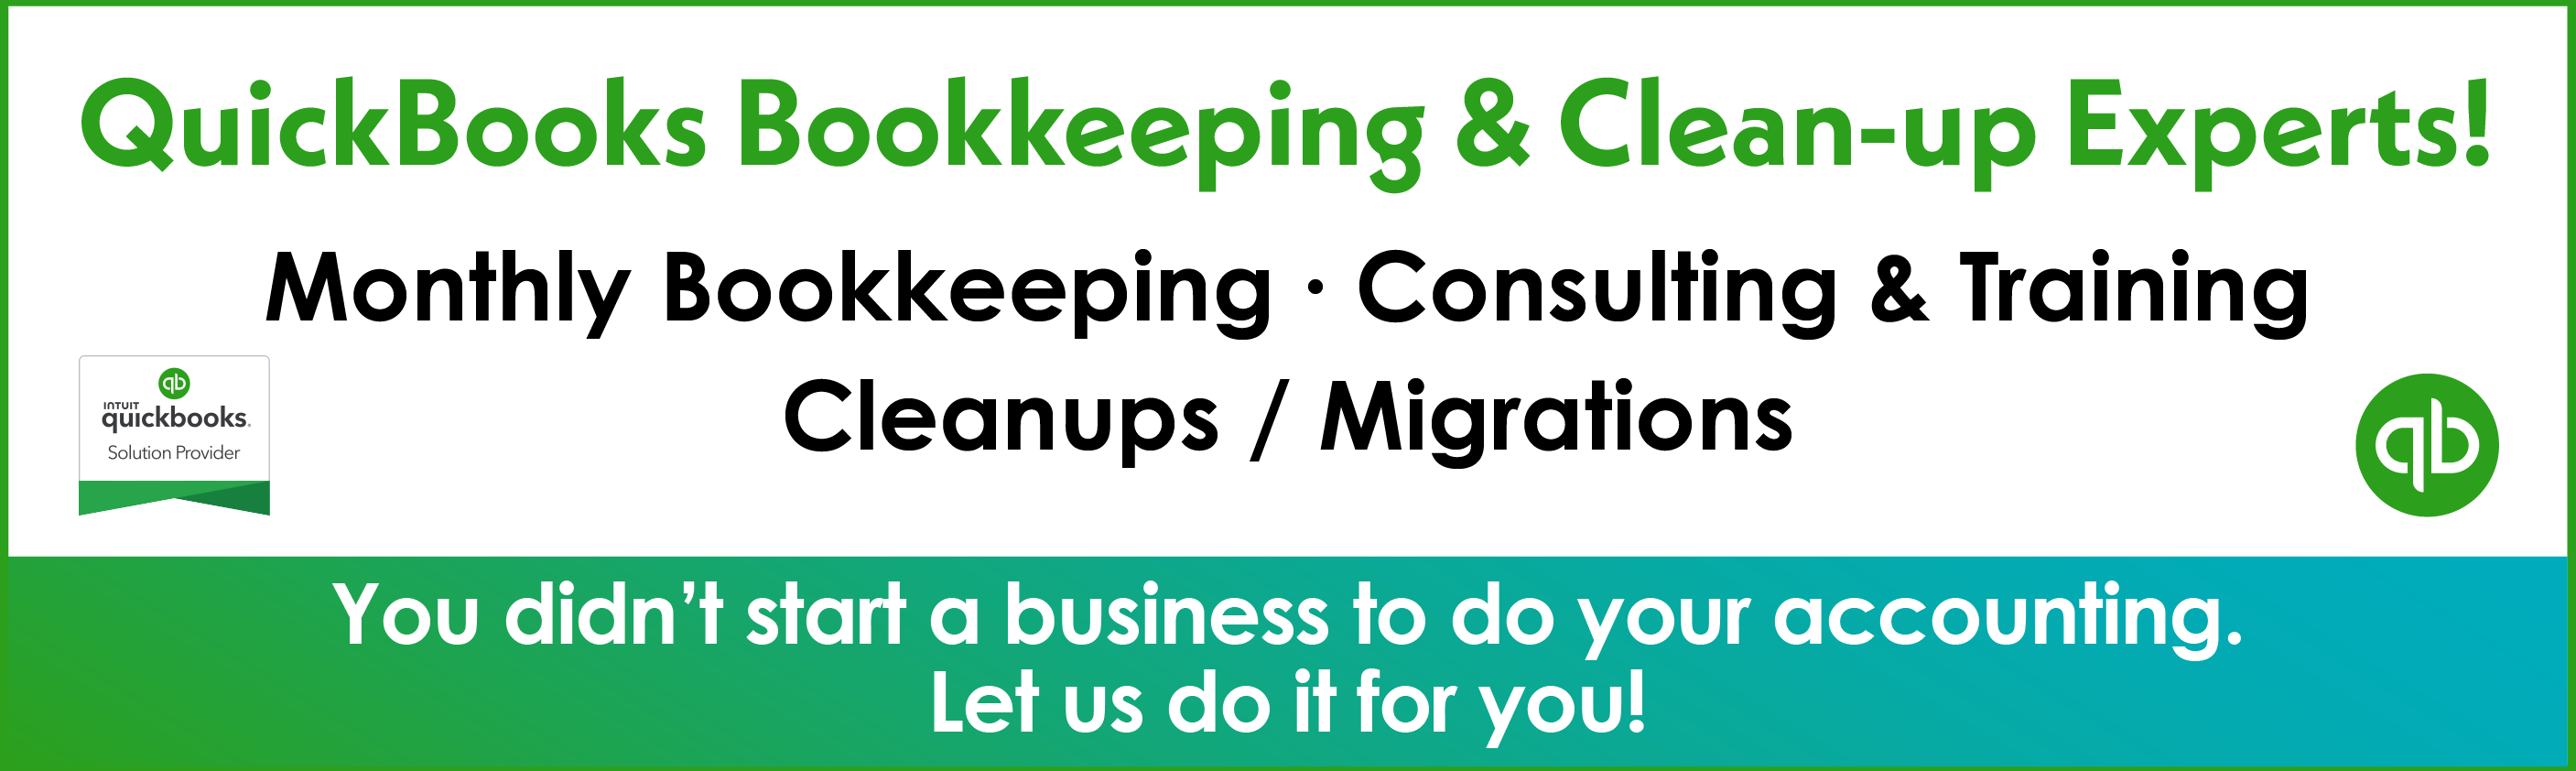 QuickBooks Bookkeeping & Clean-up Experts